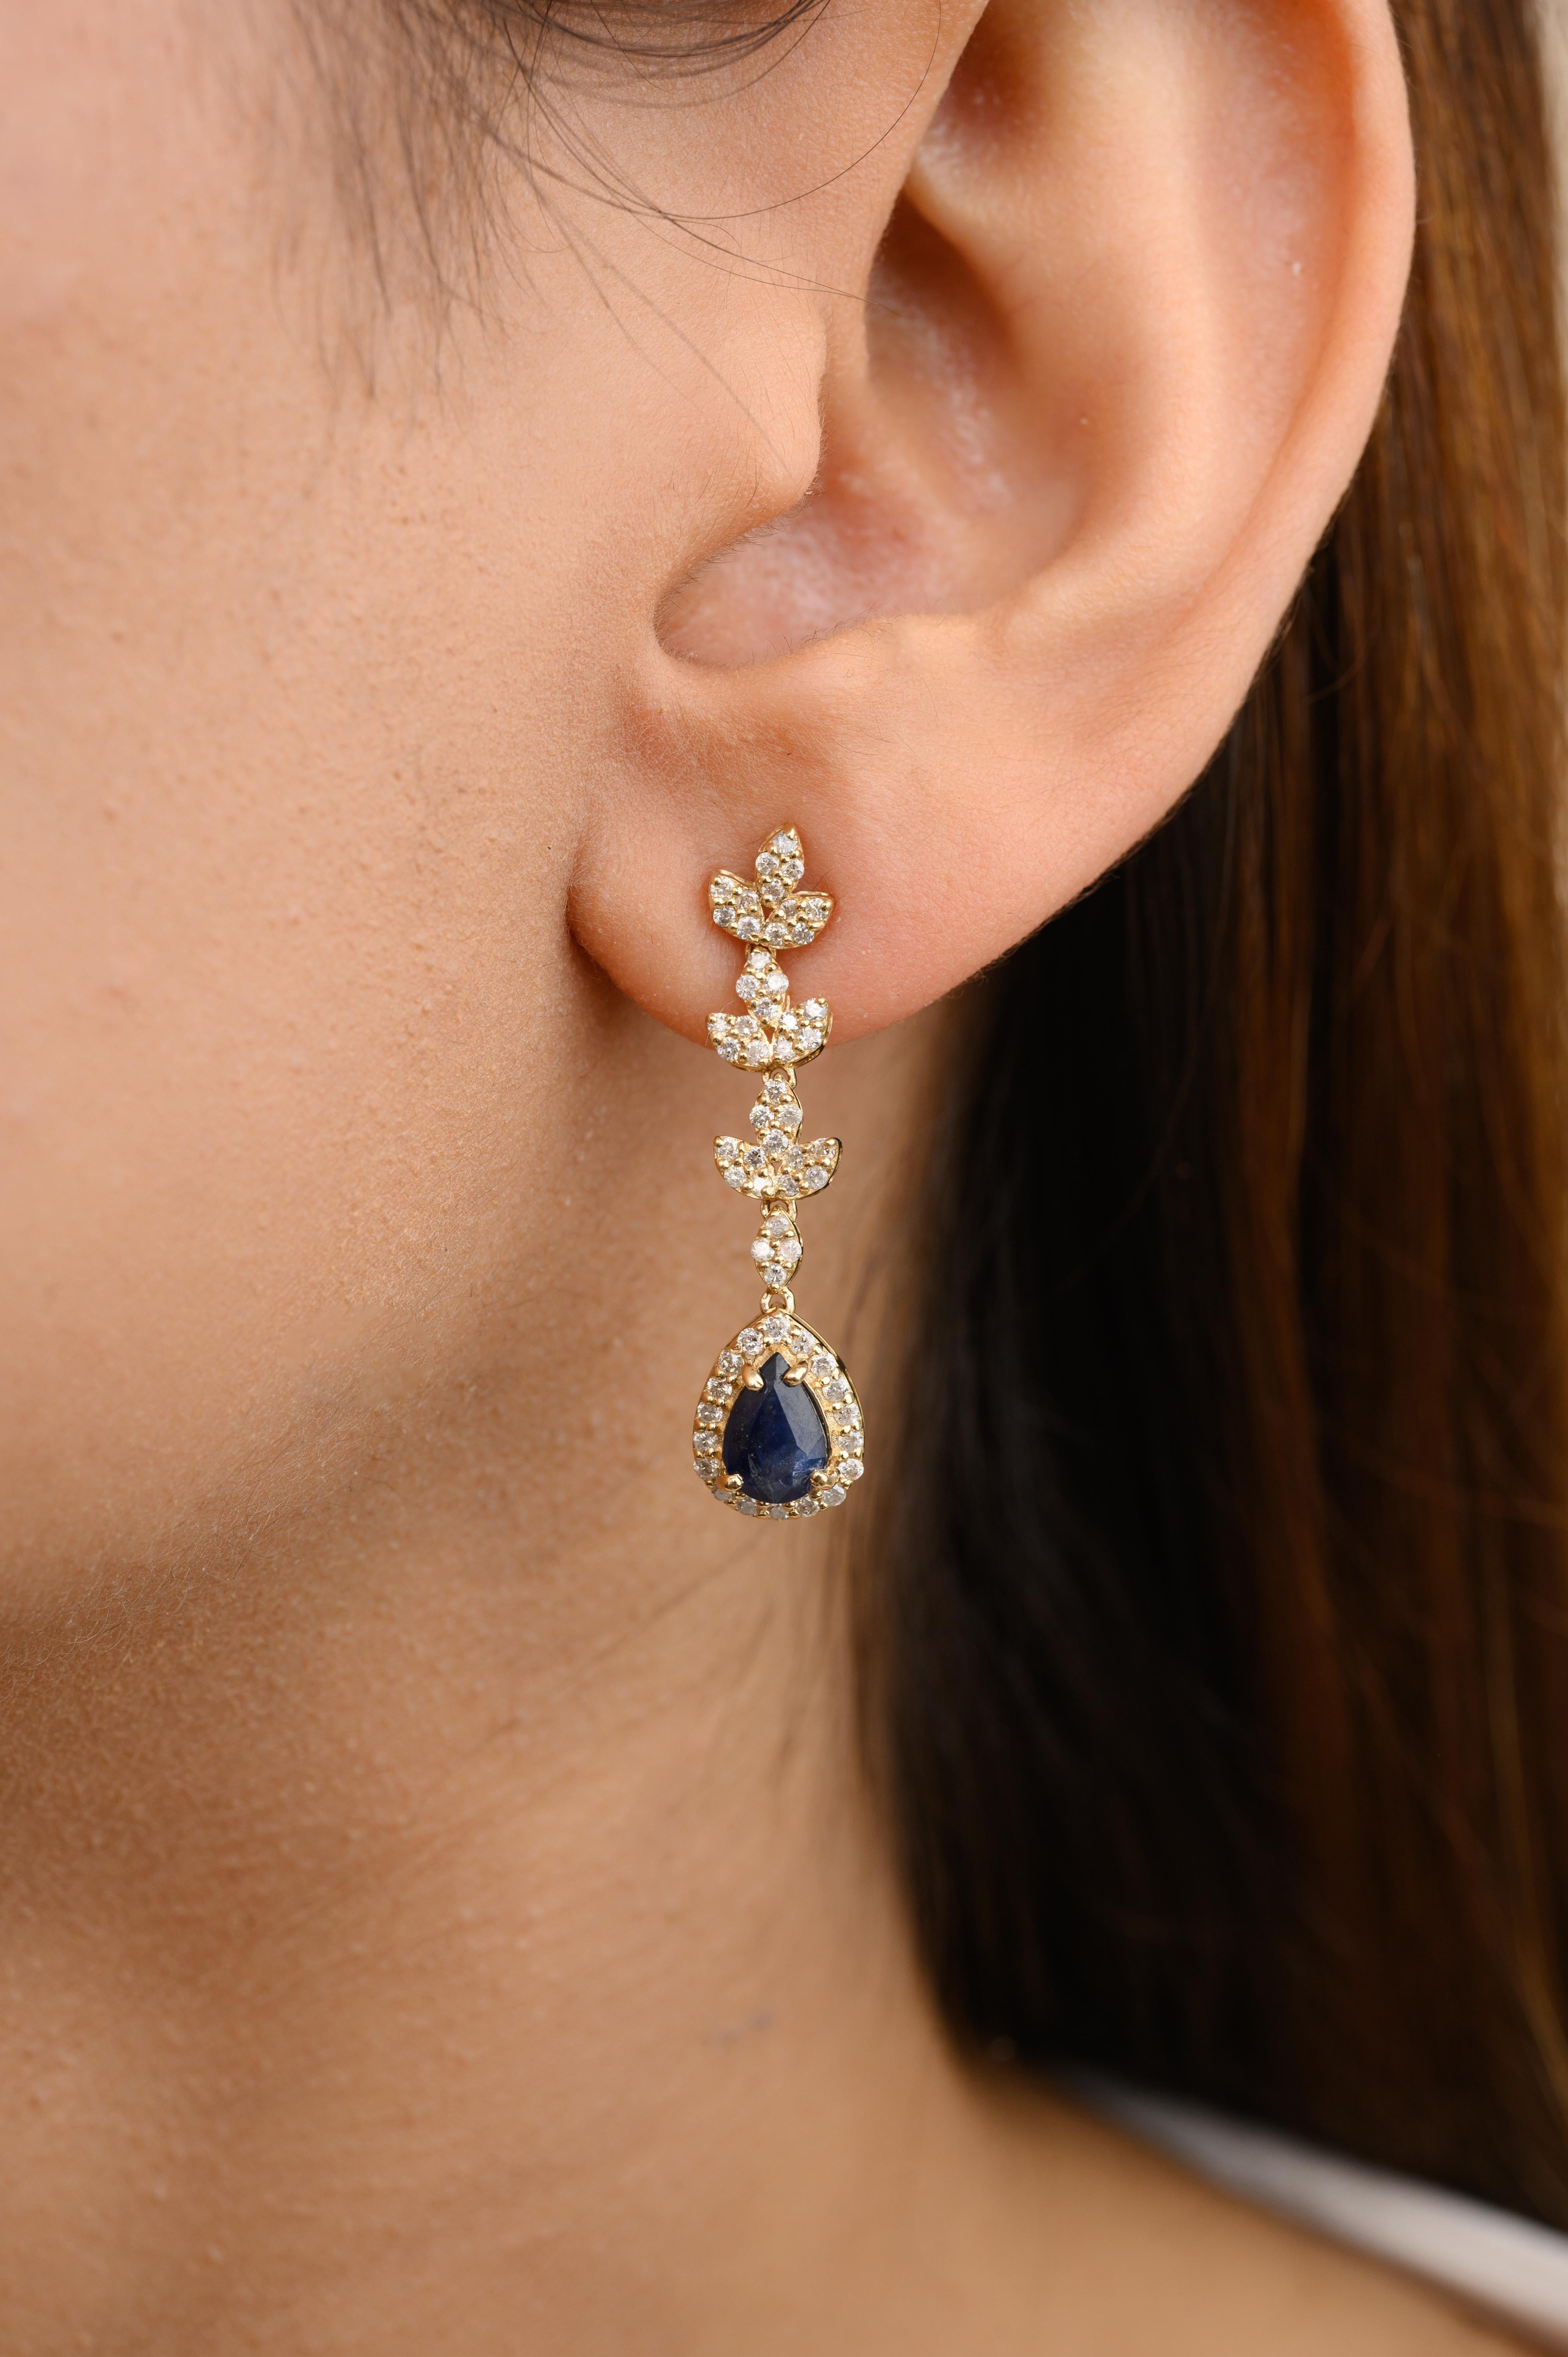 Real Blue Sapphire Diamond Cocktail Long Dangle Earrings in 14K Gold to make a statement with your look. You shall need dangle earrings to make a statement with your look. These earrings create a sparkling, luxurious look featuring pear cut blue